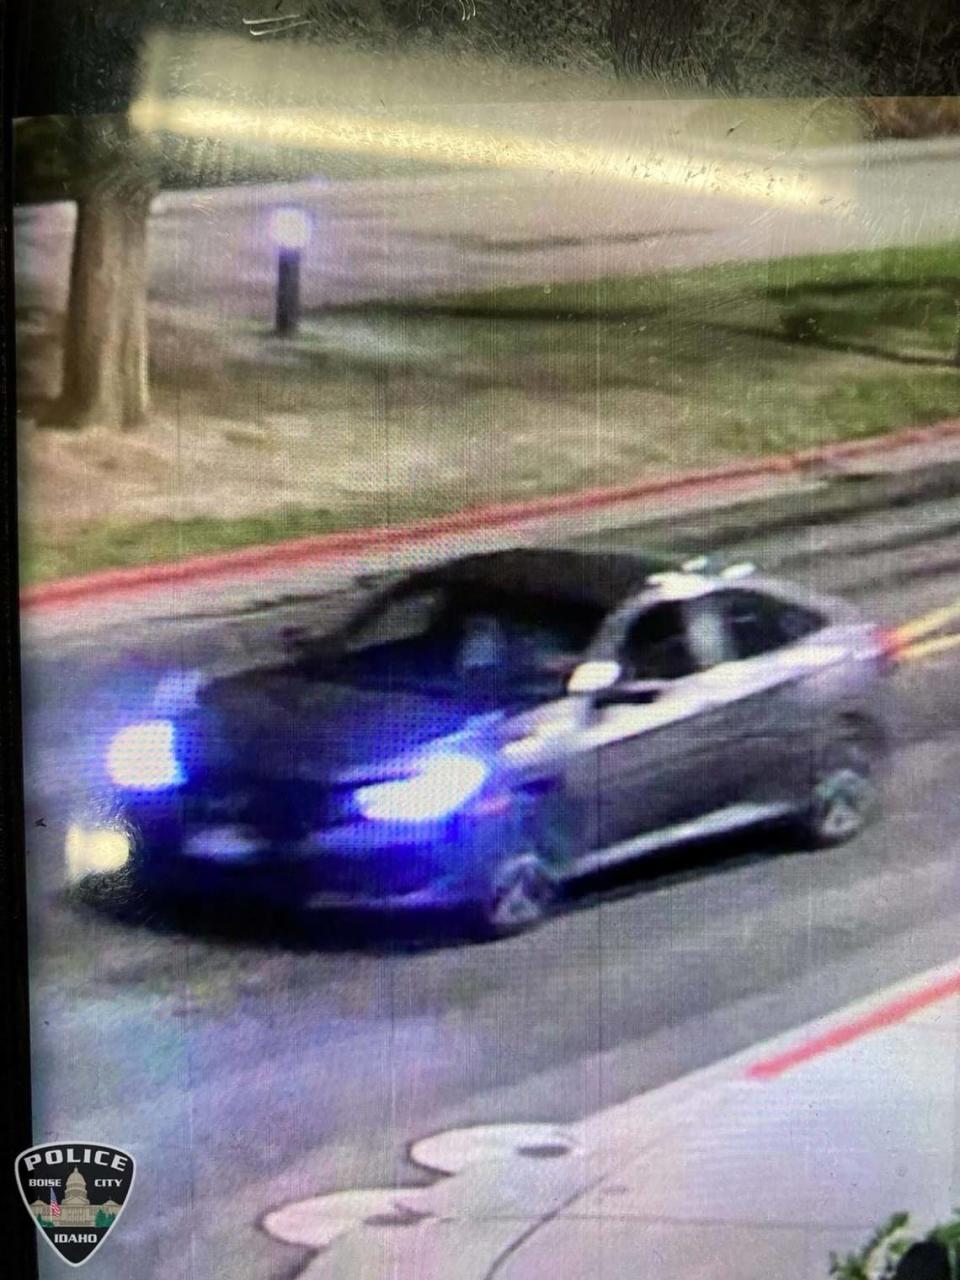 Police said the suspects were last seen traveling in a gray 2020 Honda Civic with license plate number 2TDF43U.